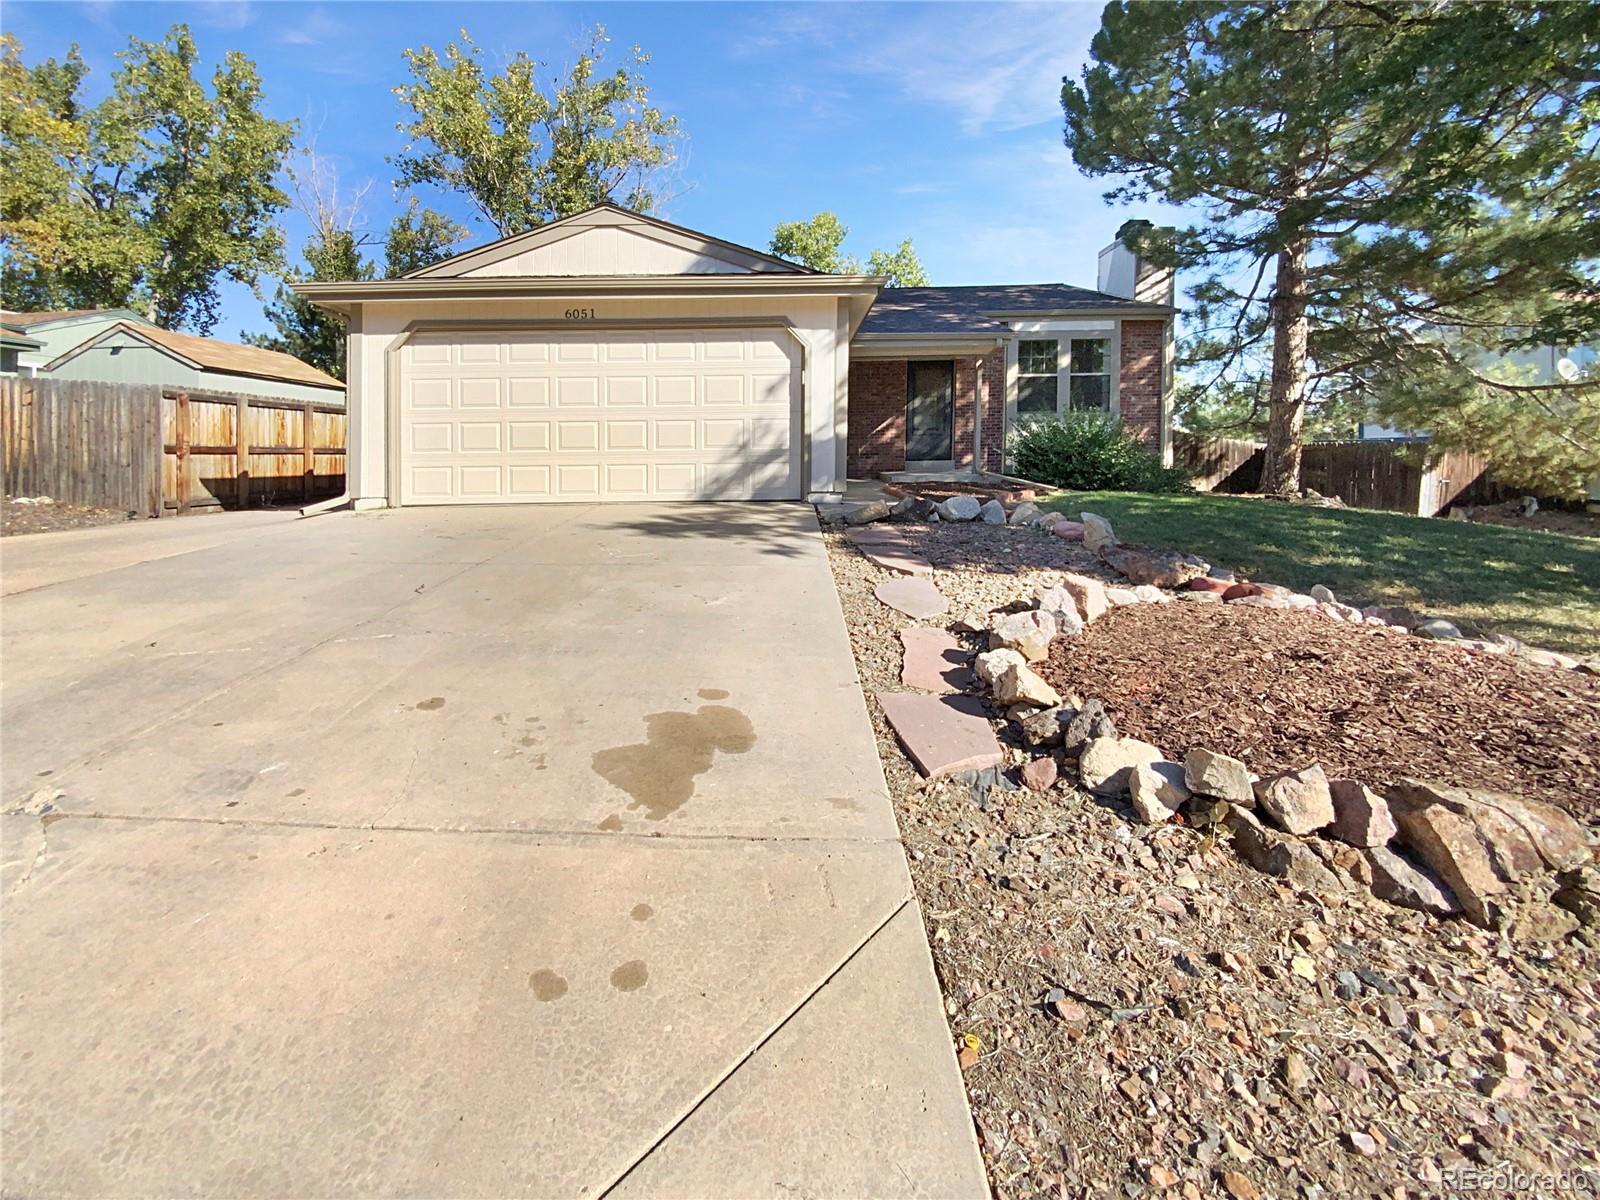 6233 W 78th Ave, Arvada, CO 80003, MLS# 1003629